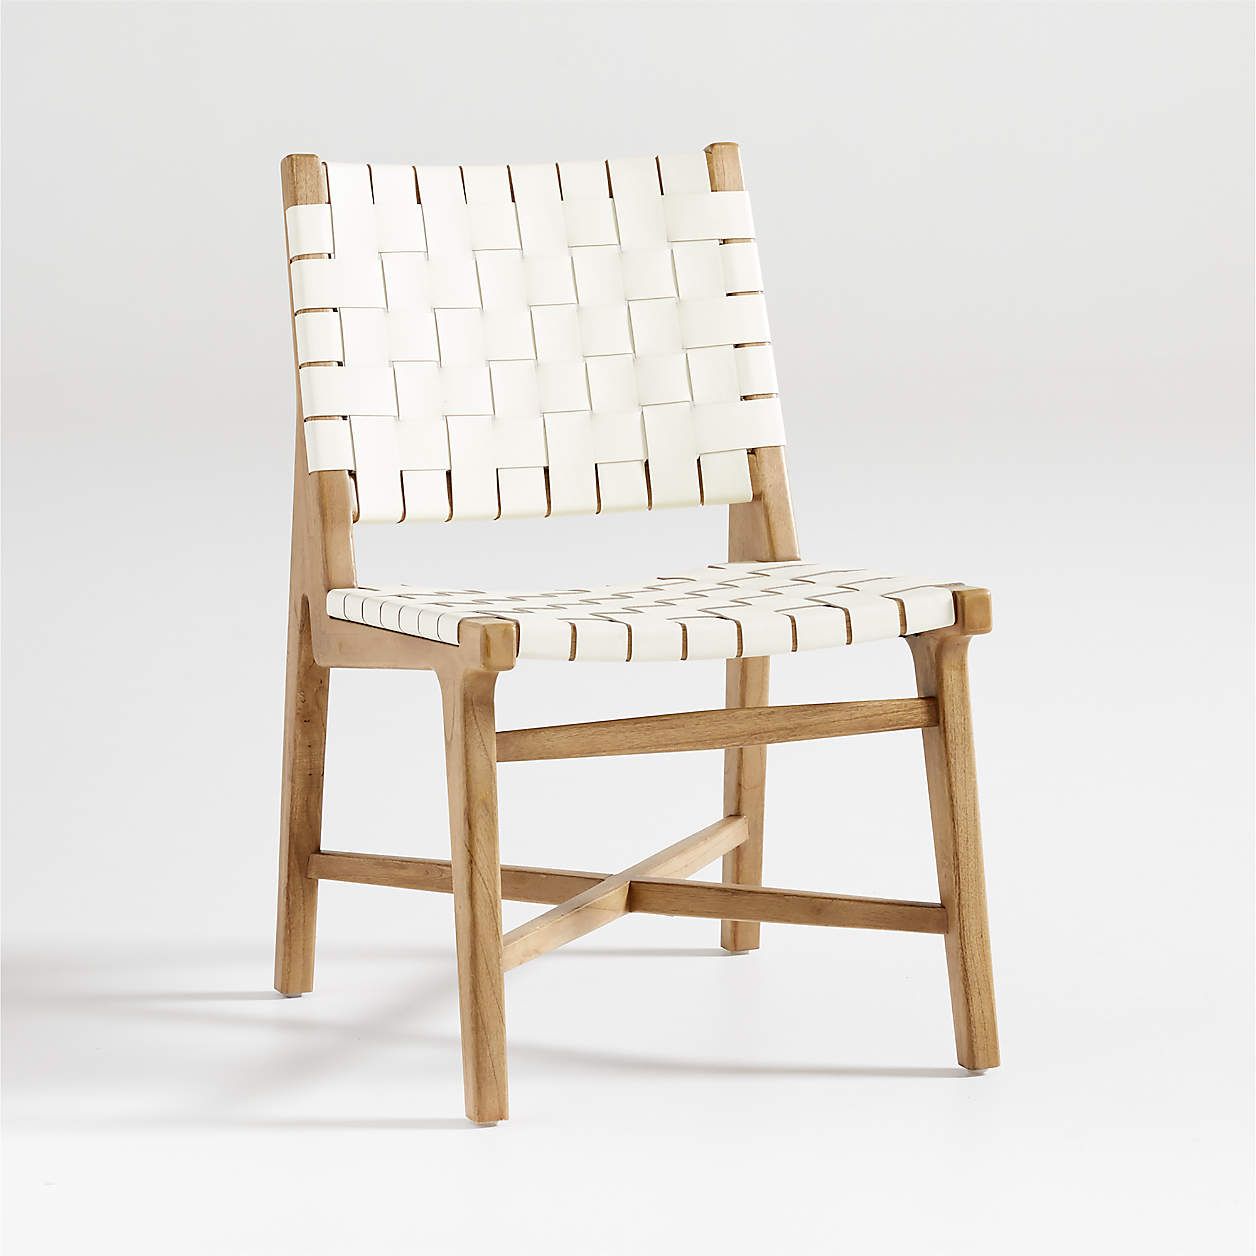 Taj White Woven Leather Dining Chair | Crate & Barrel | Crate & Barrel